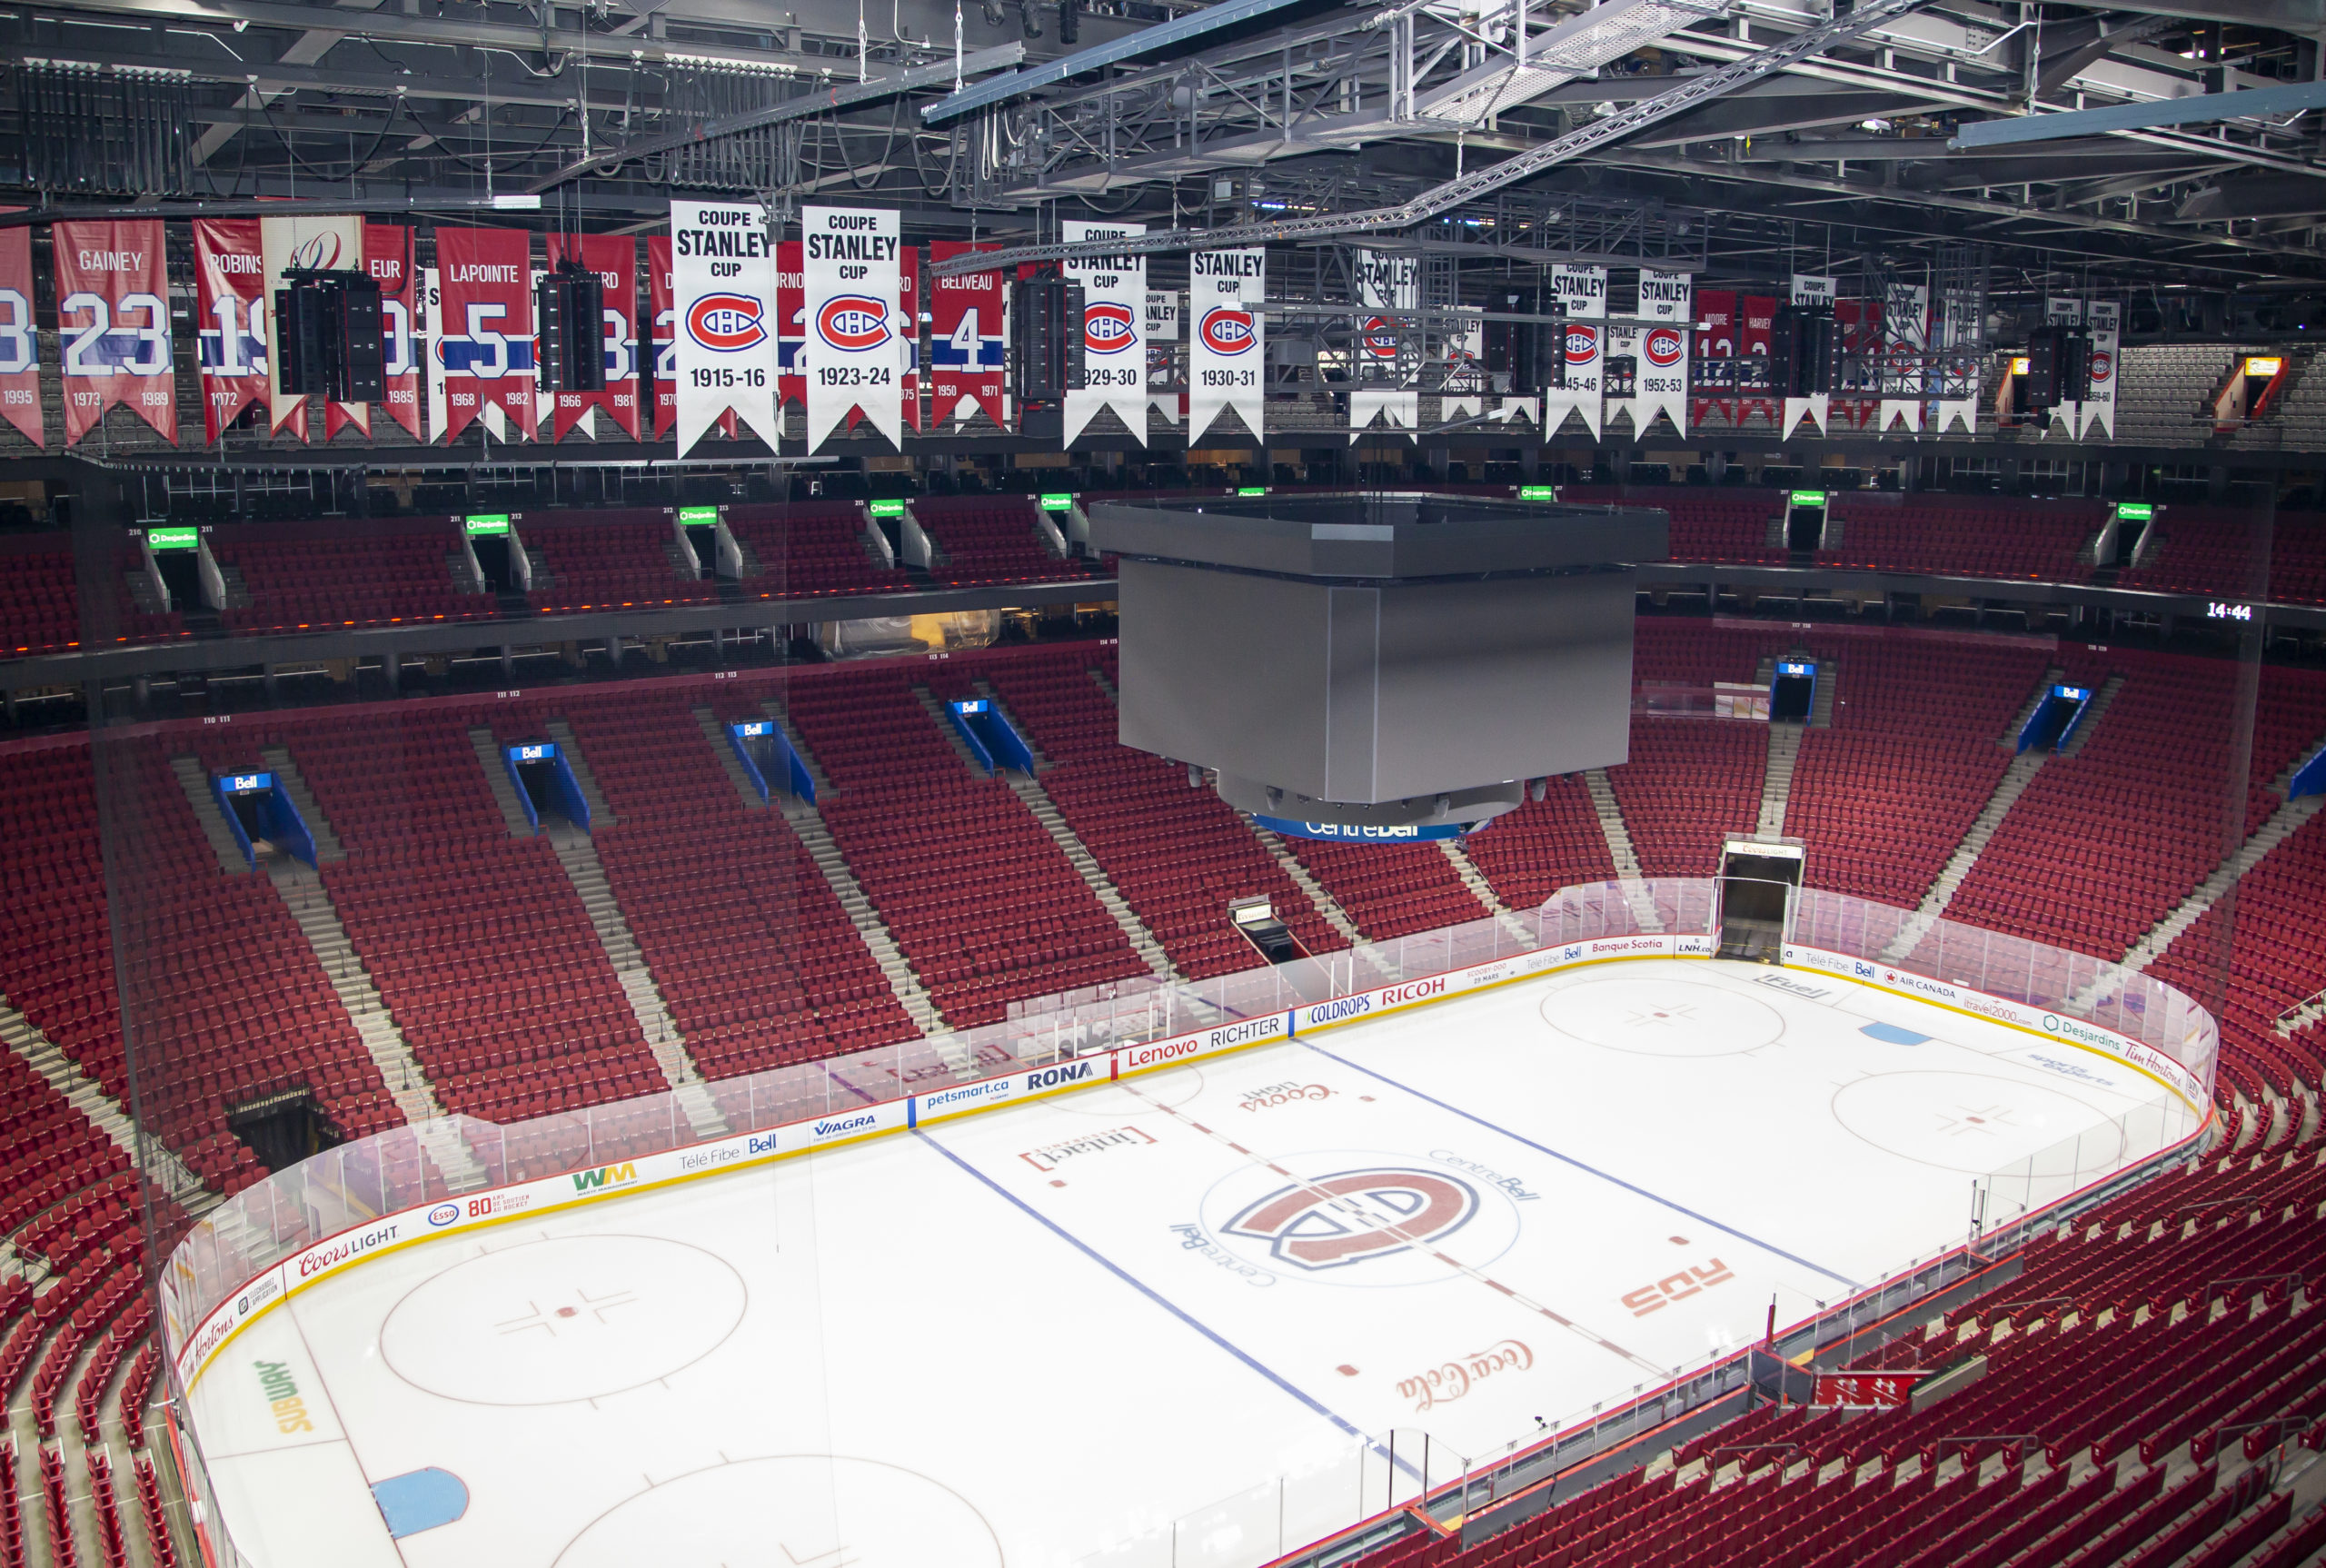 The Centre Bell, home to NHL’s Montreal Canadiens